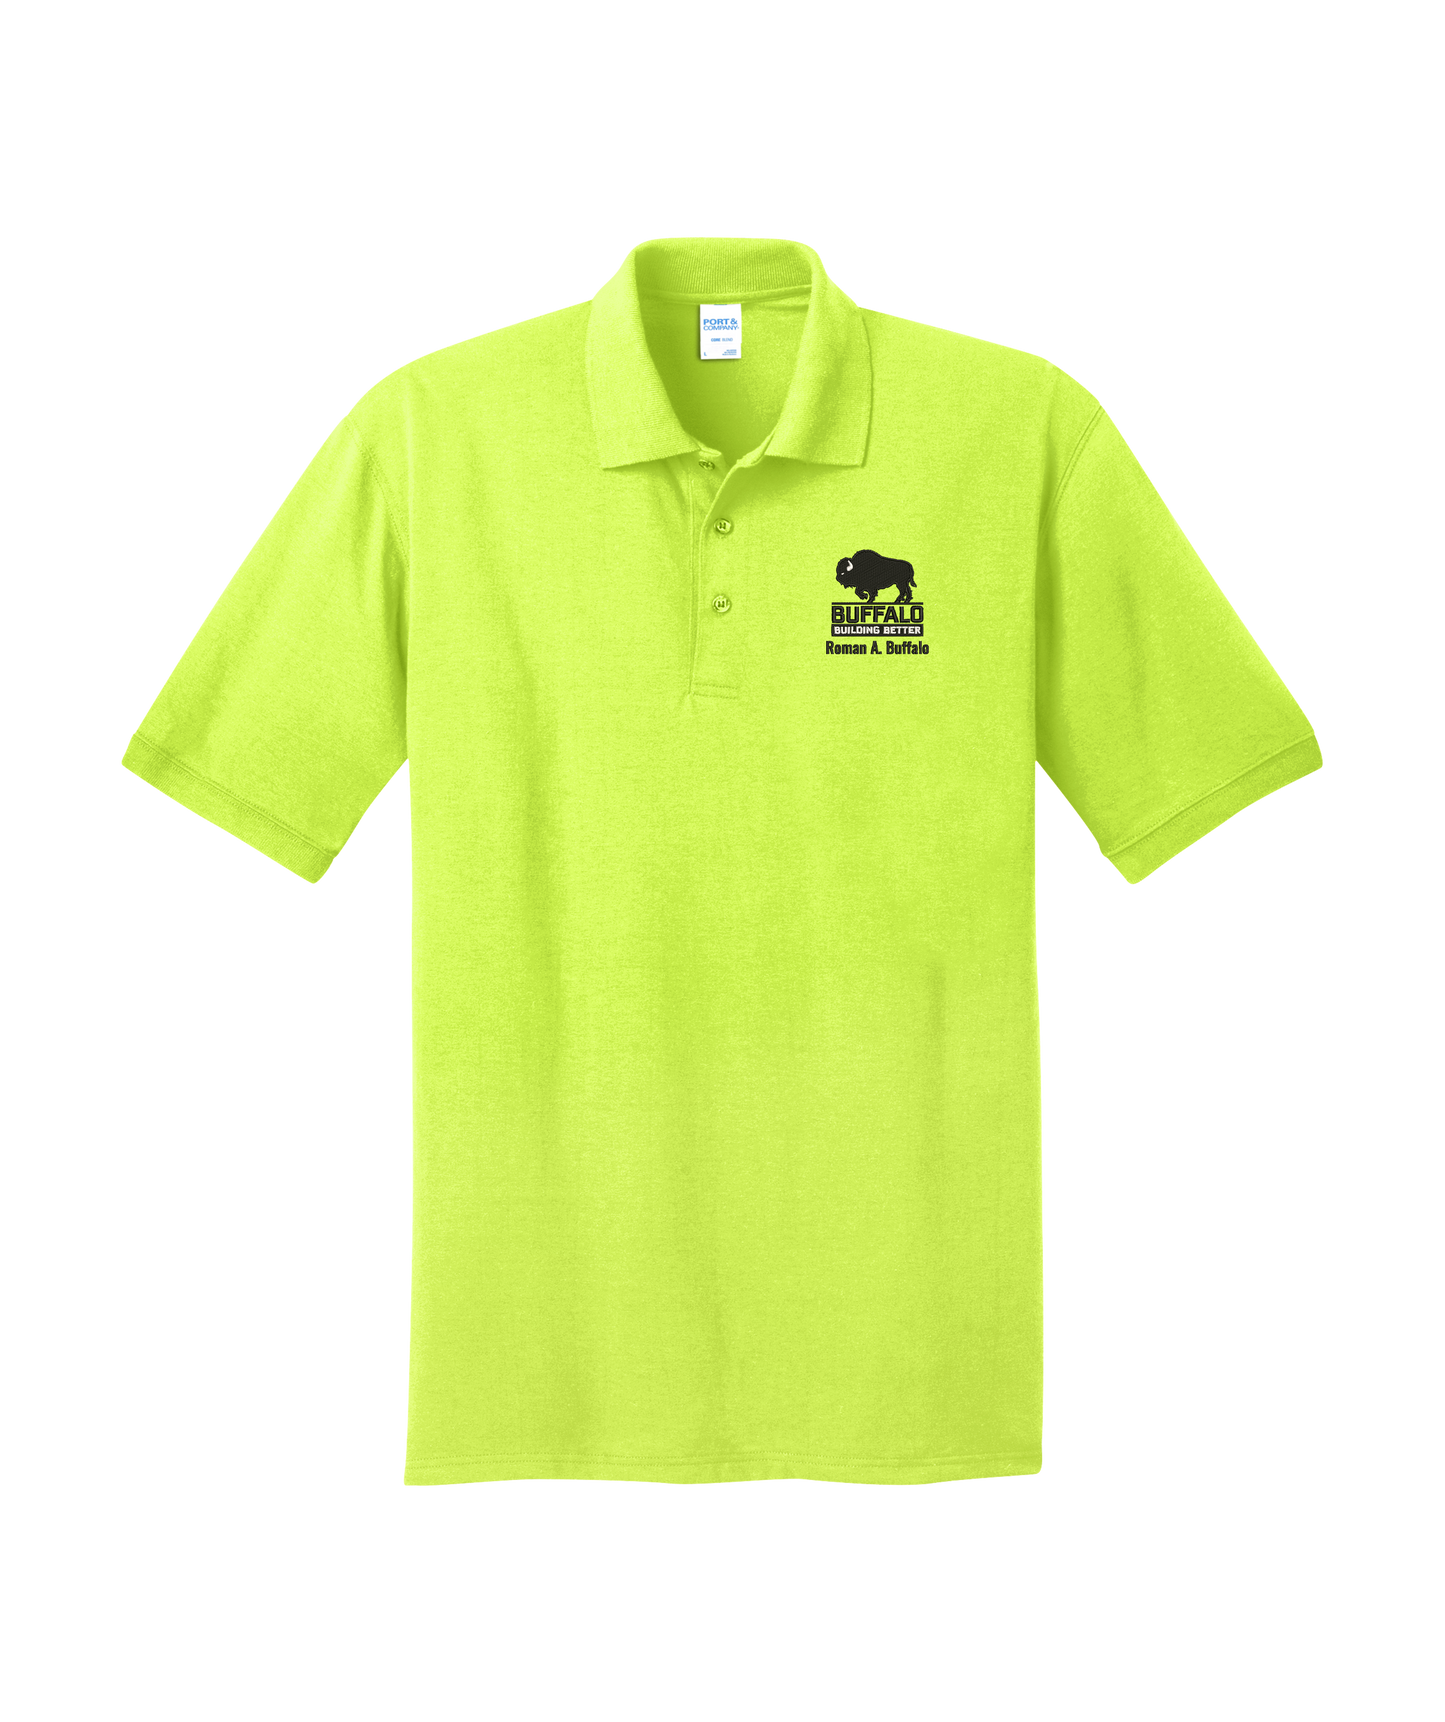 Port & Company® Tall Core Blend Jersey Knit Polo - Personalized